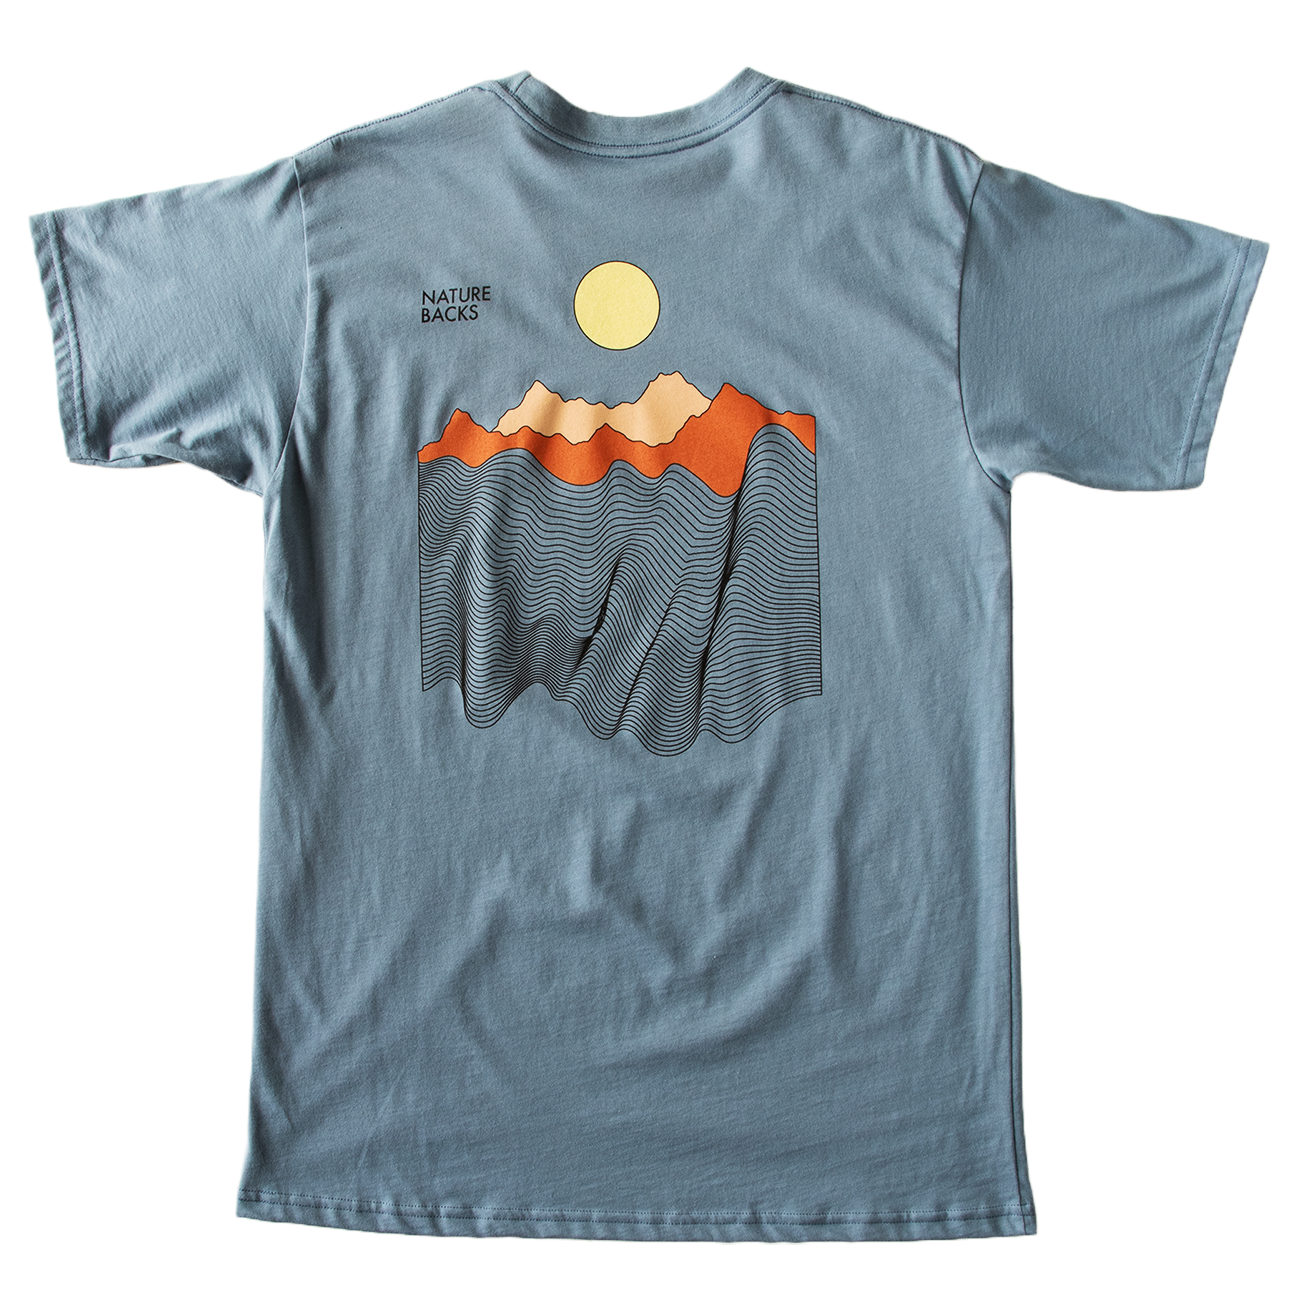 Nature Backs Limited Edition Short Sleeve 100% Organic Cotton T-Shirt | Limited Ebb and Flow Fog Short Sleeve made with Eco-Friendly Fibers Sustainably made in the USA 